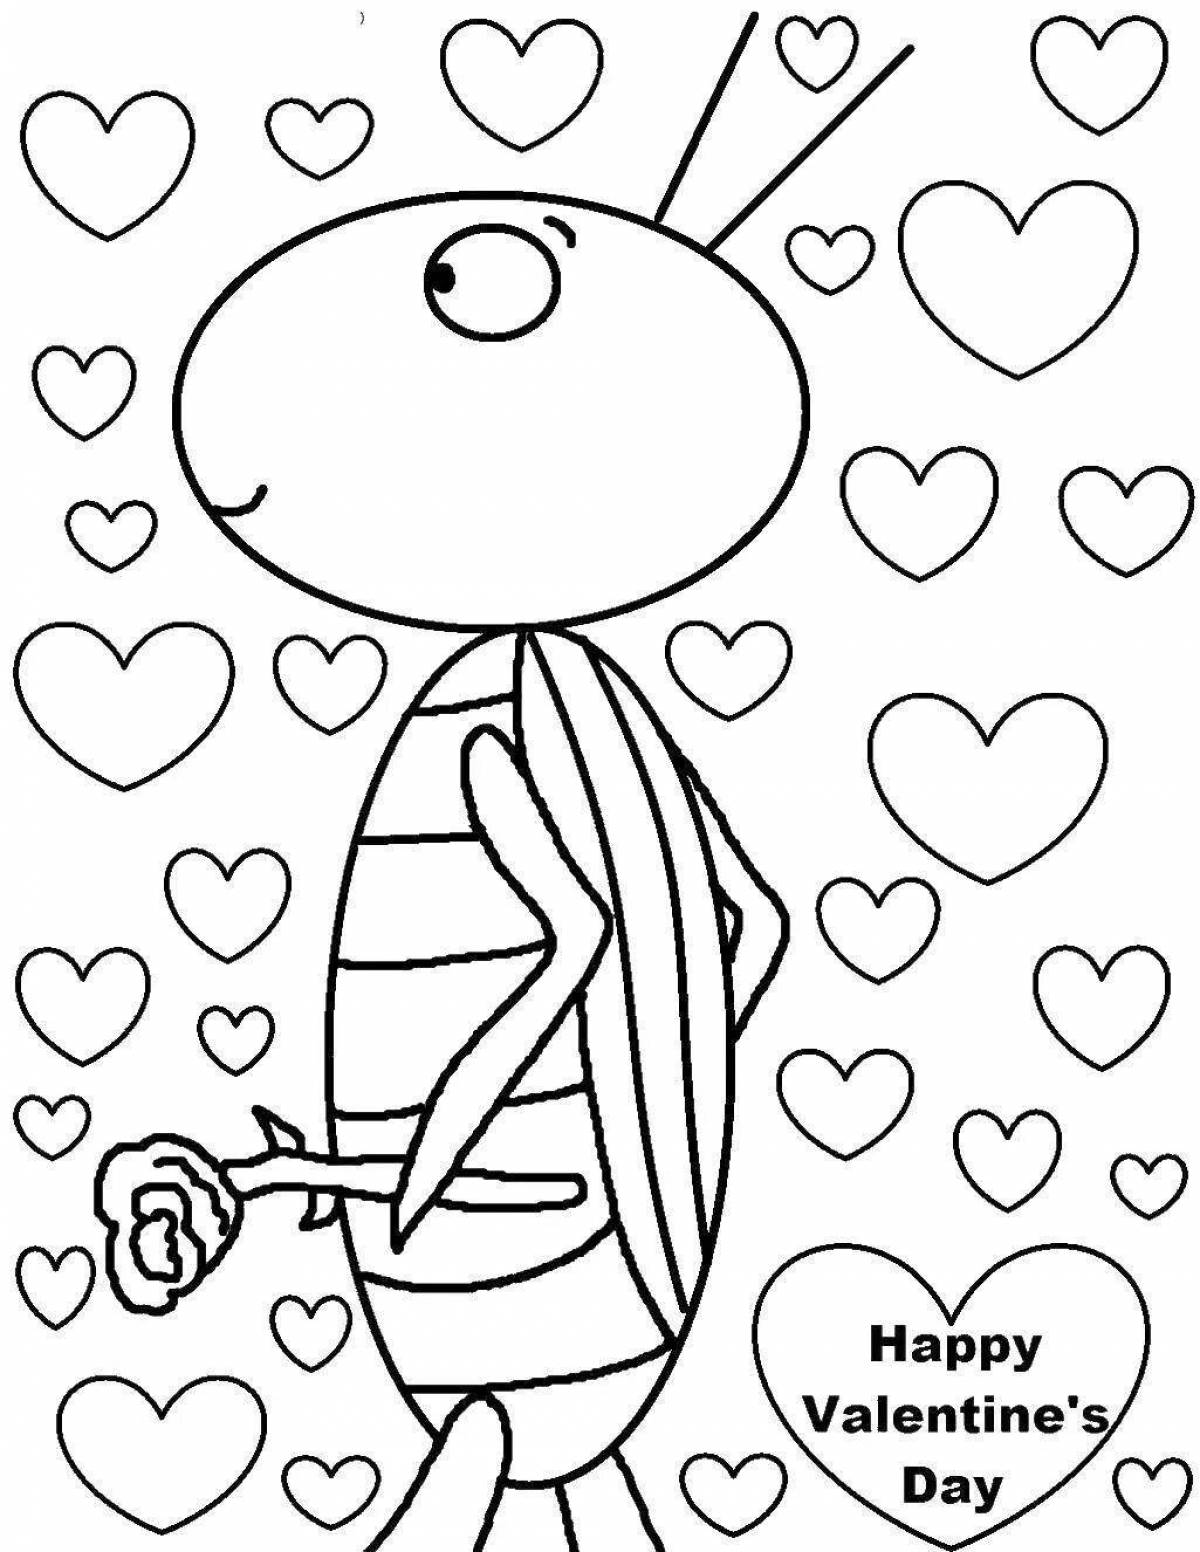 Inspirational valentine's day coloring book